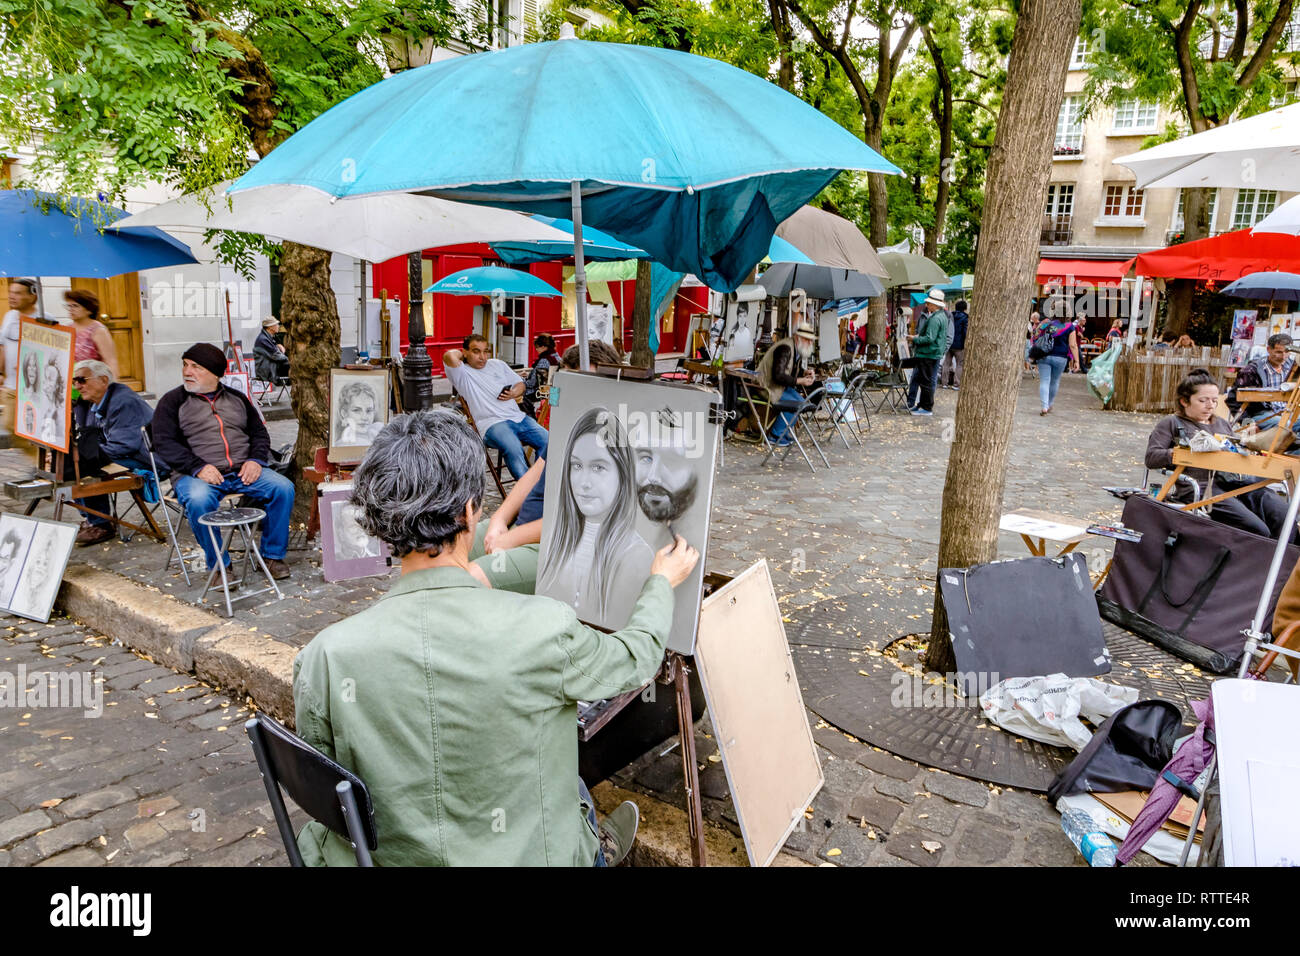 An artist at work sketching a portrait of woman in Place Du Tetre ,a popular Square in Montmartre, Paris, France Stock Photo